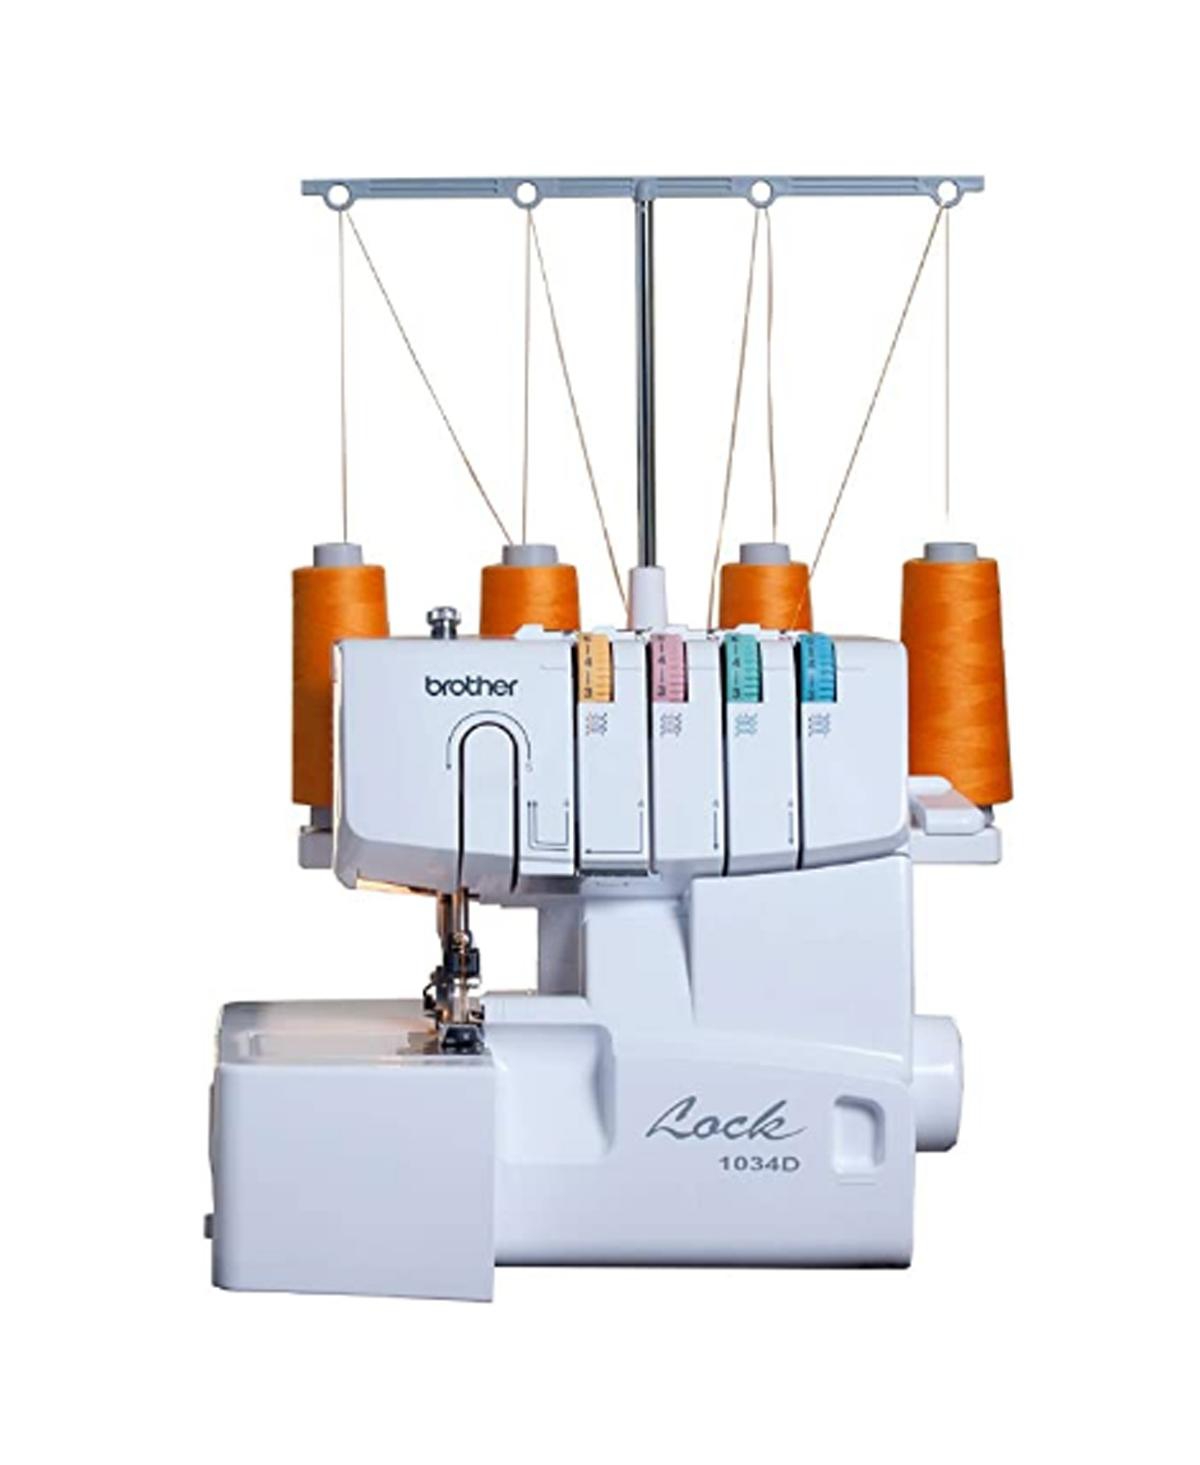 1034D 3 or 4 Thread Serger Sewing Machine with Easy Lay In Threading - White